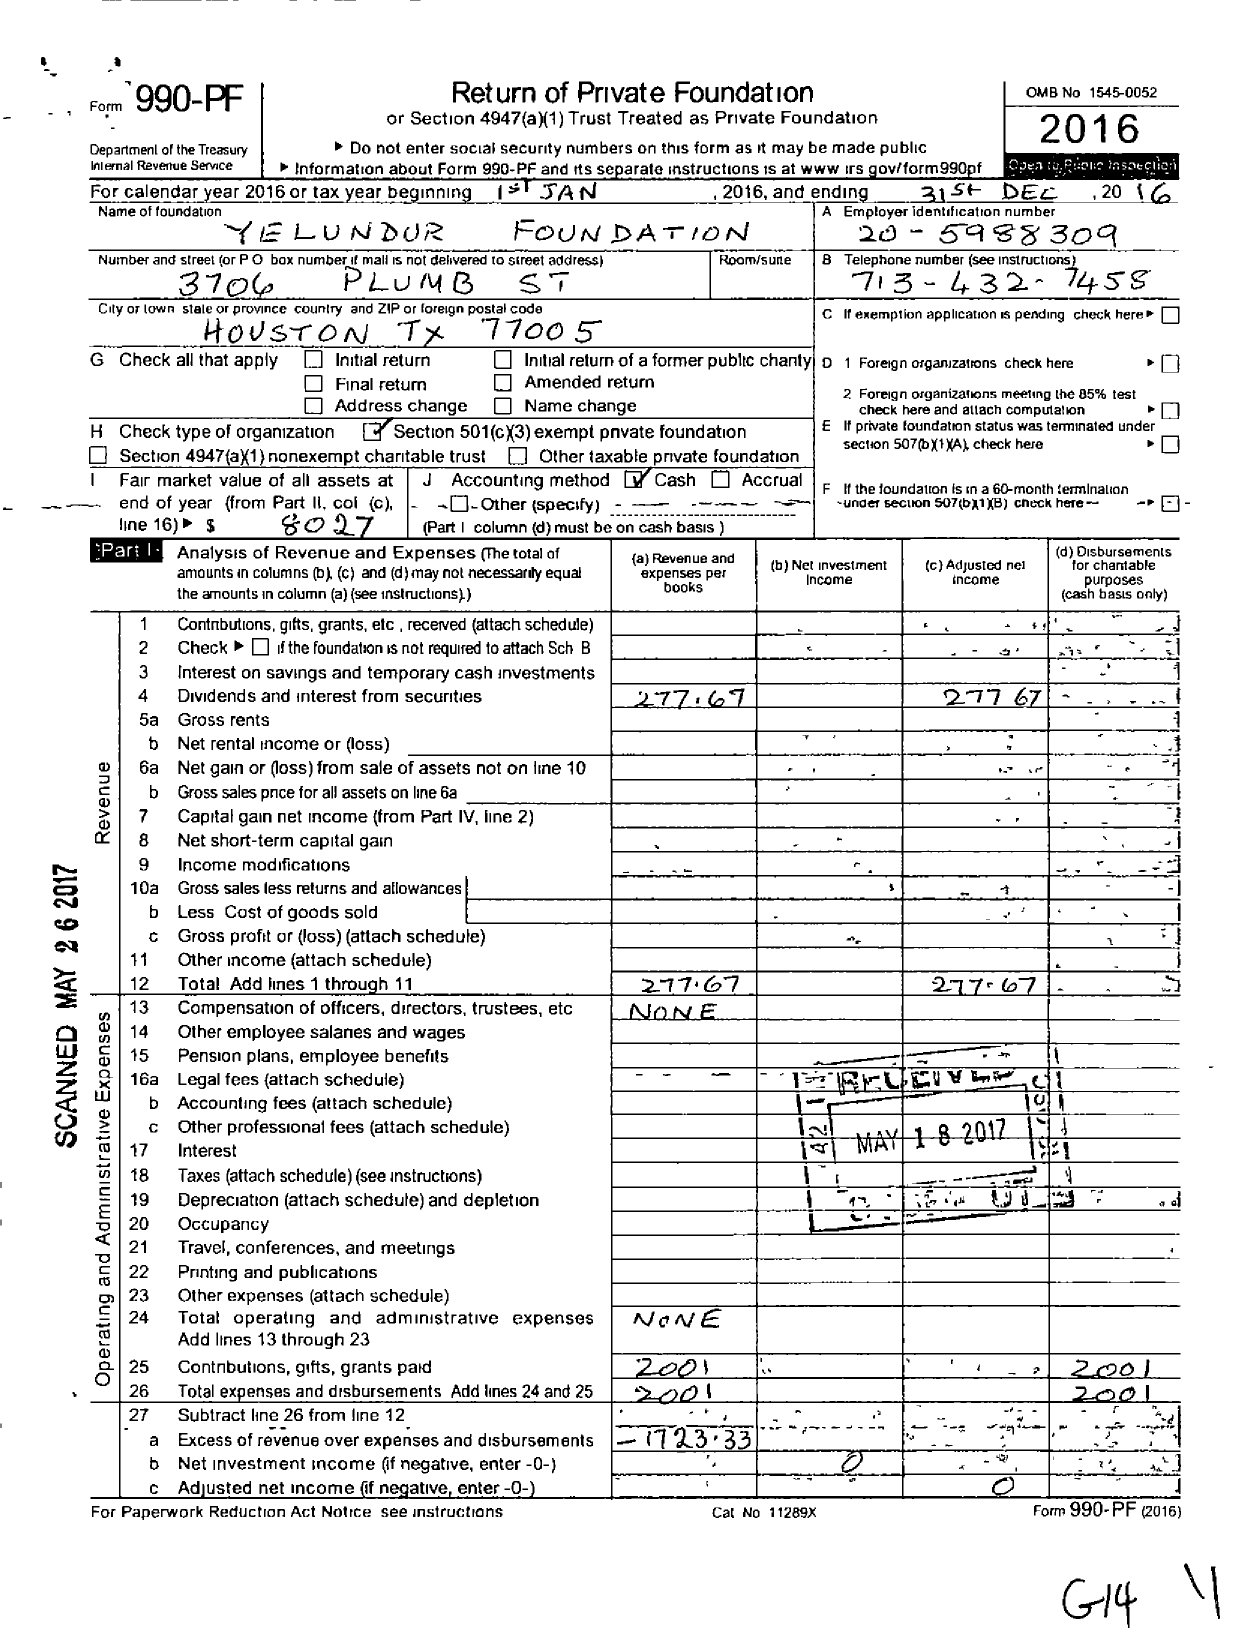 Image of first page of 2016 Form 990PF for The Yelundur Foundation